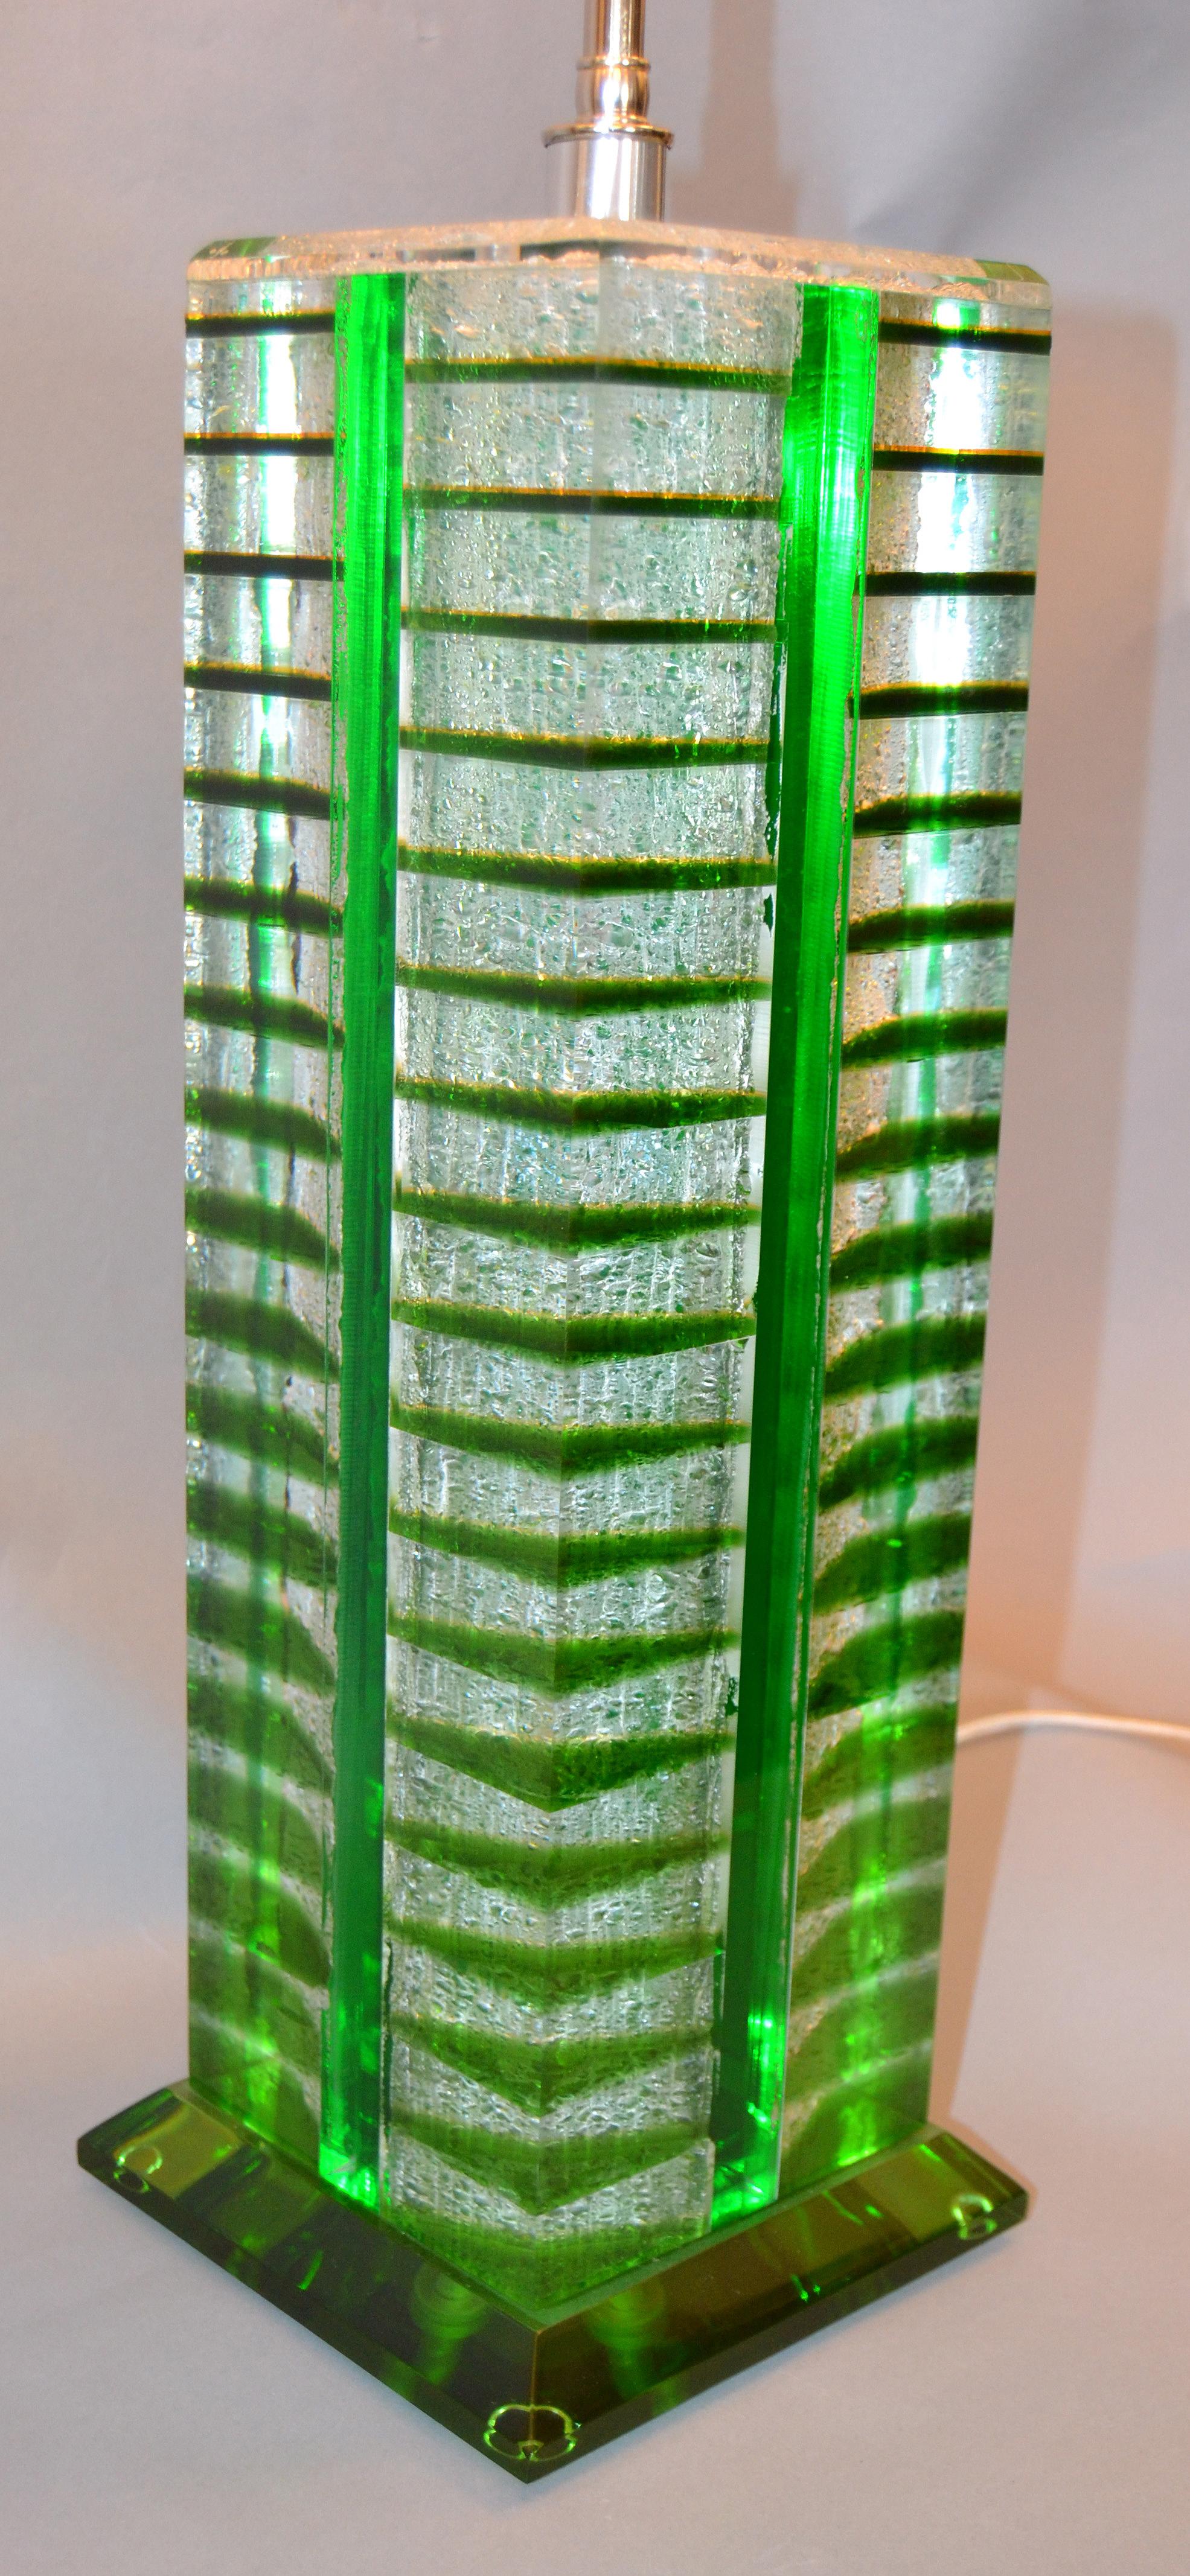 A pair of architectural shaped table lamps in green, white and transparent Lucite pieces.
They come with a unique matching rectangular shade in acrylic.
The lamp holders are made out of nickel with expandable double cluster sockets and pull